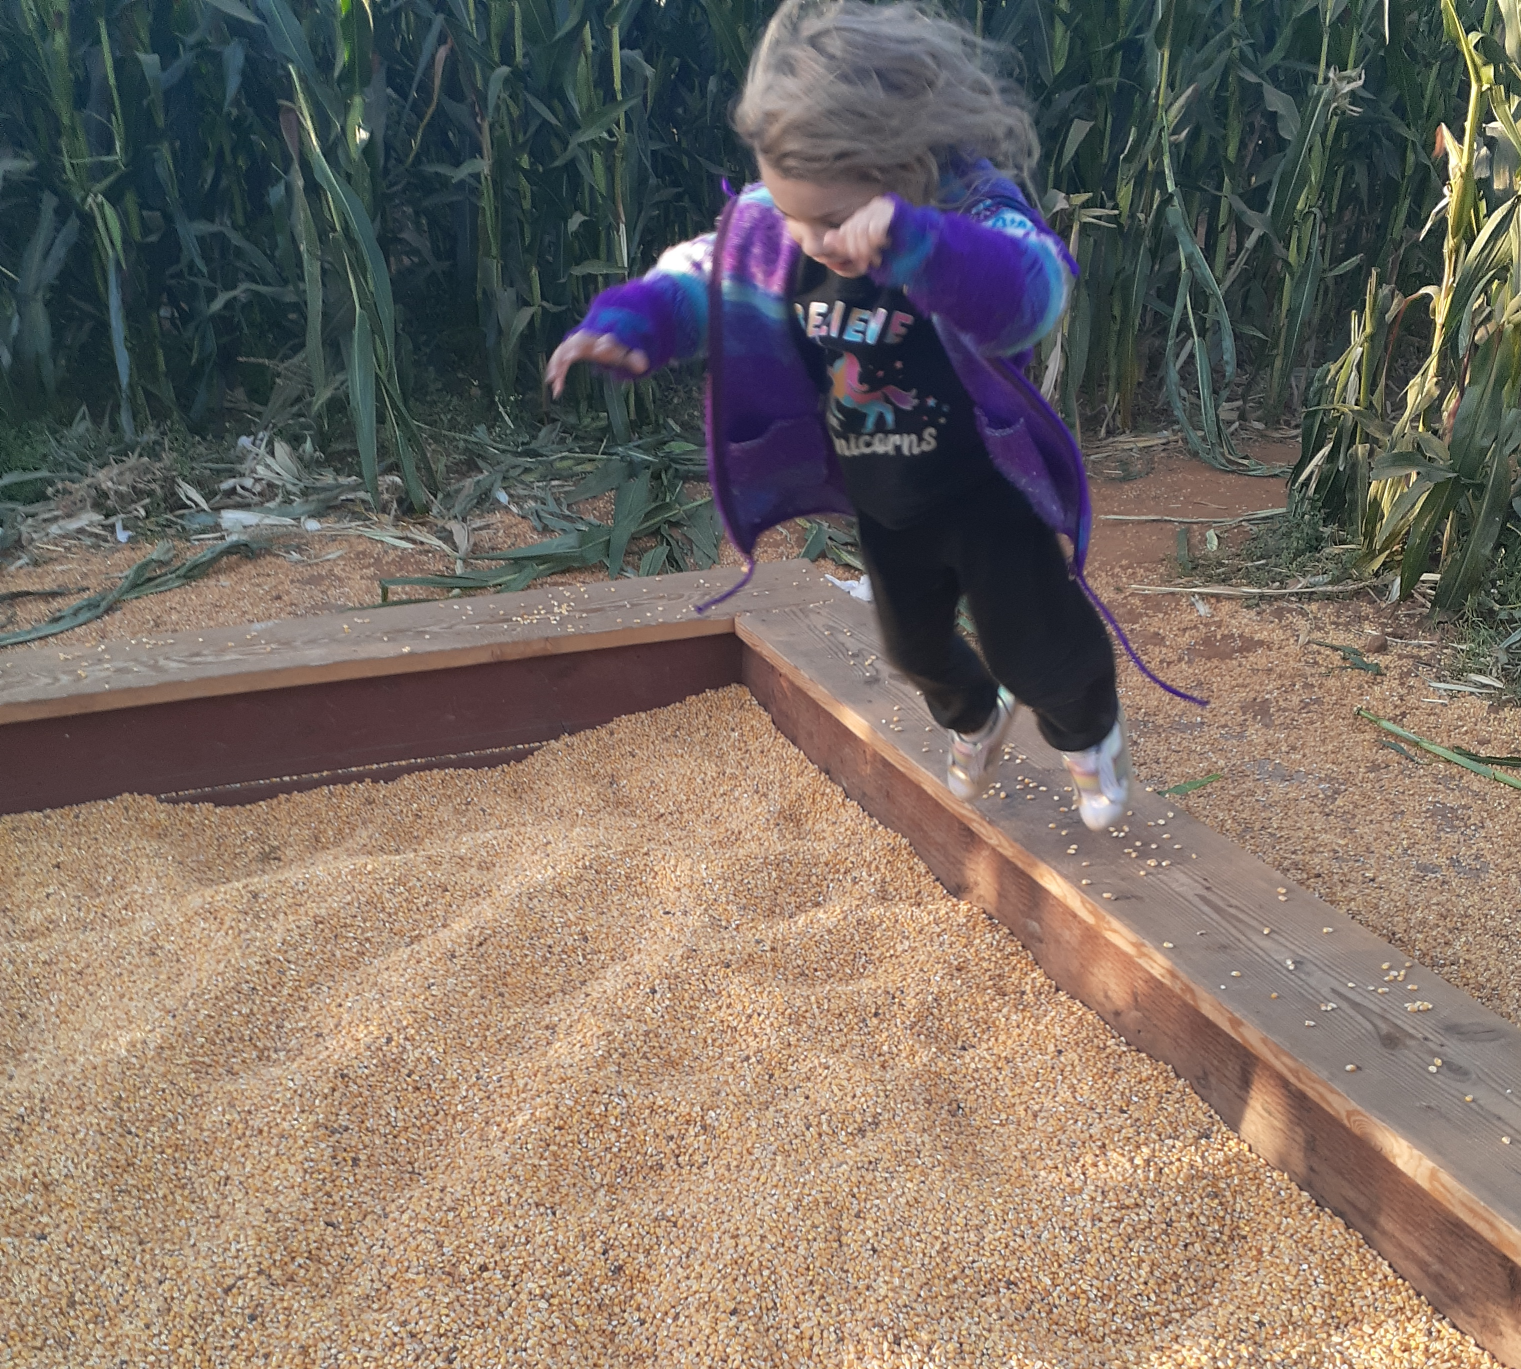 High Quality jumping into a corn pit Blank Meme Template